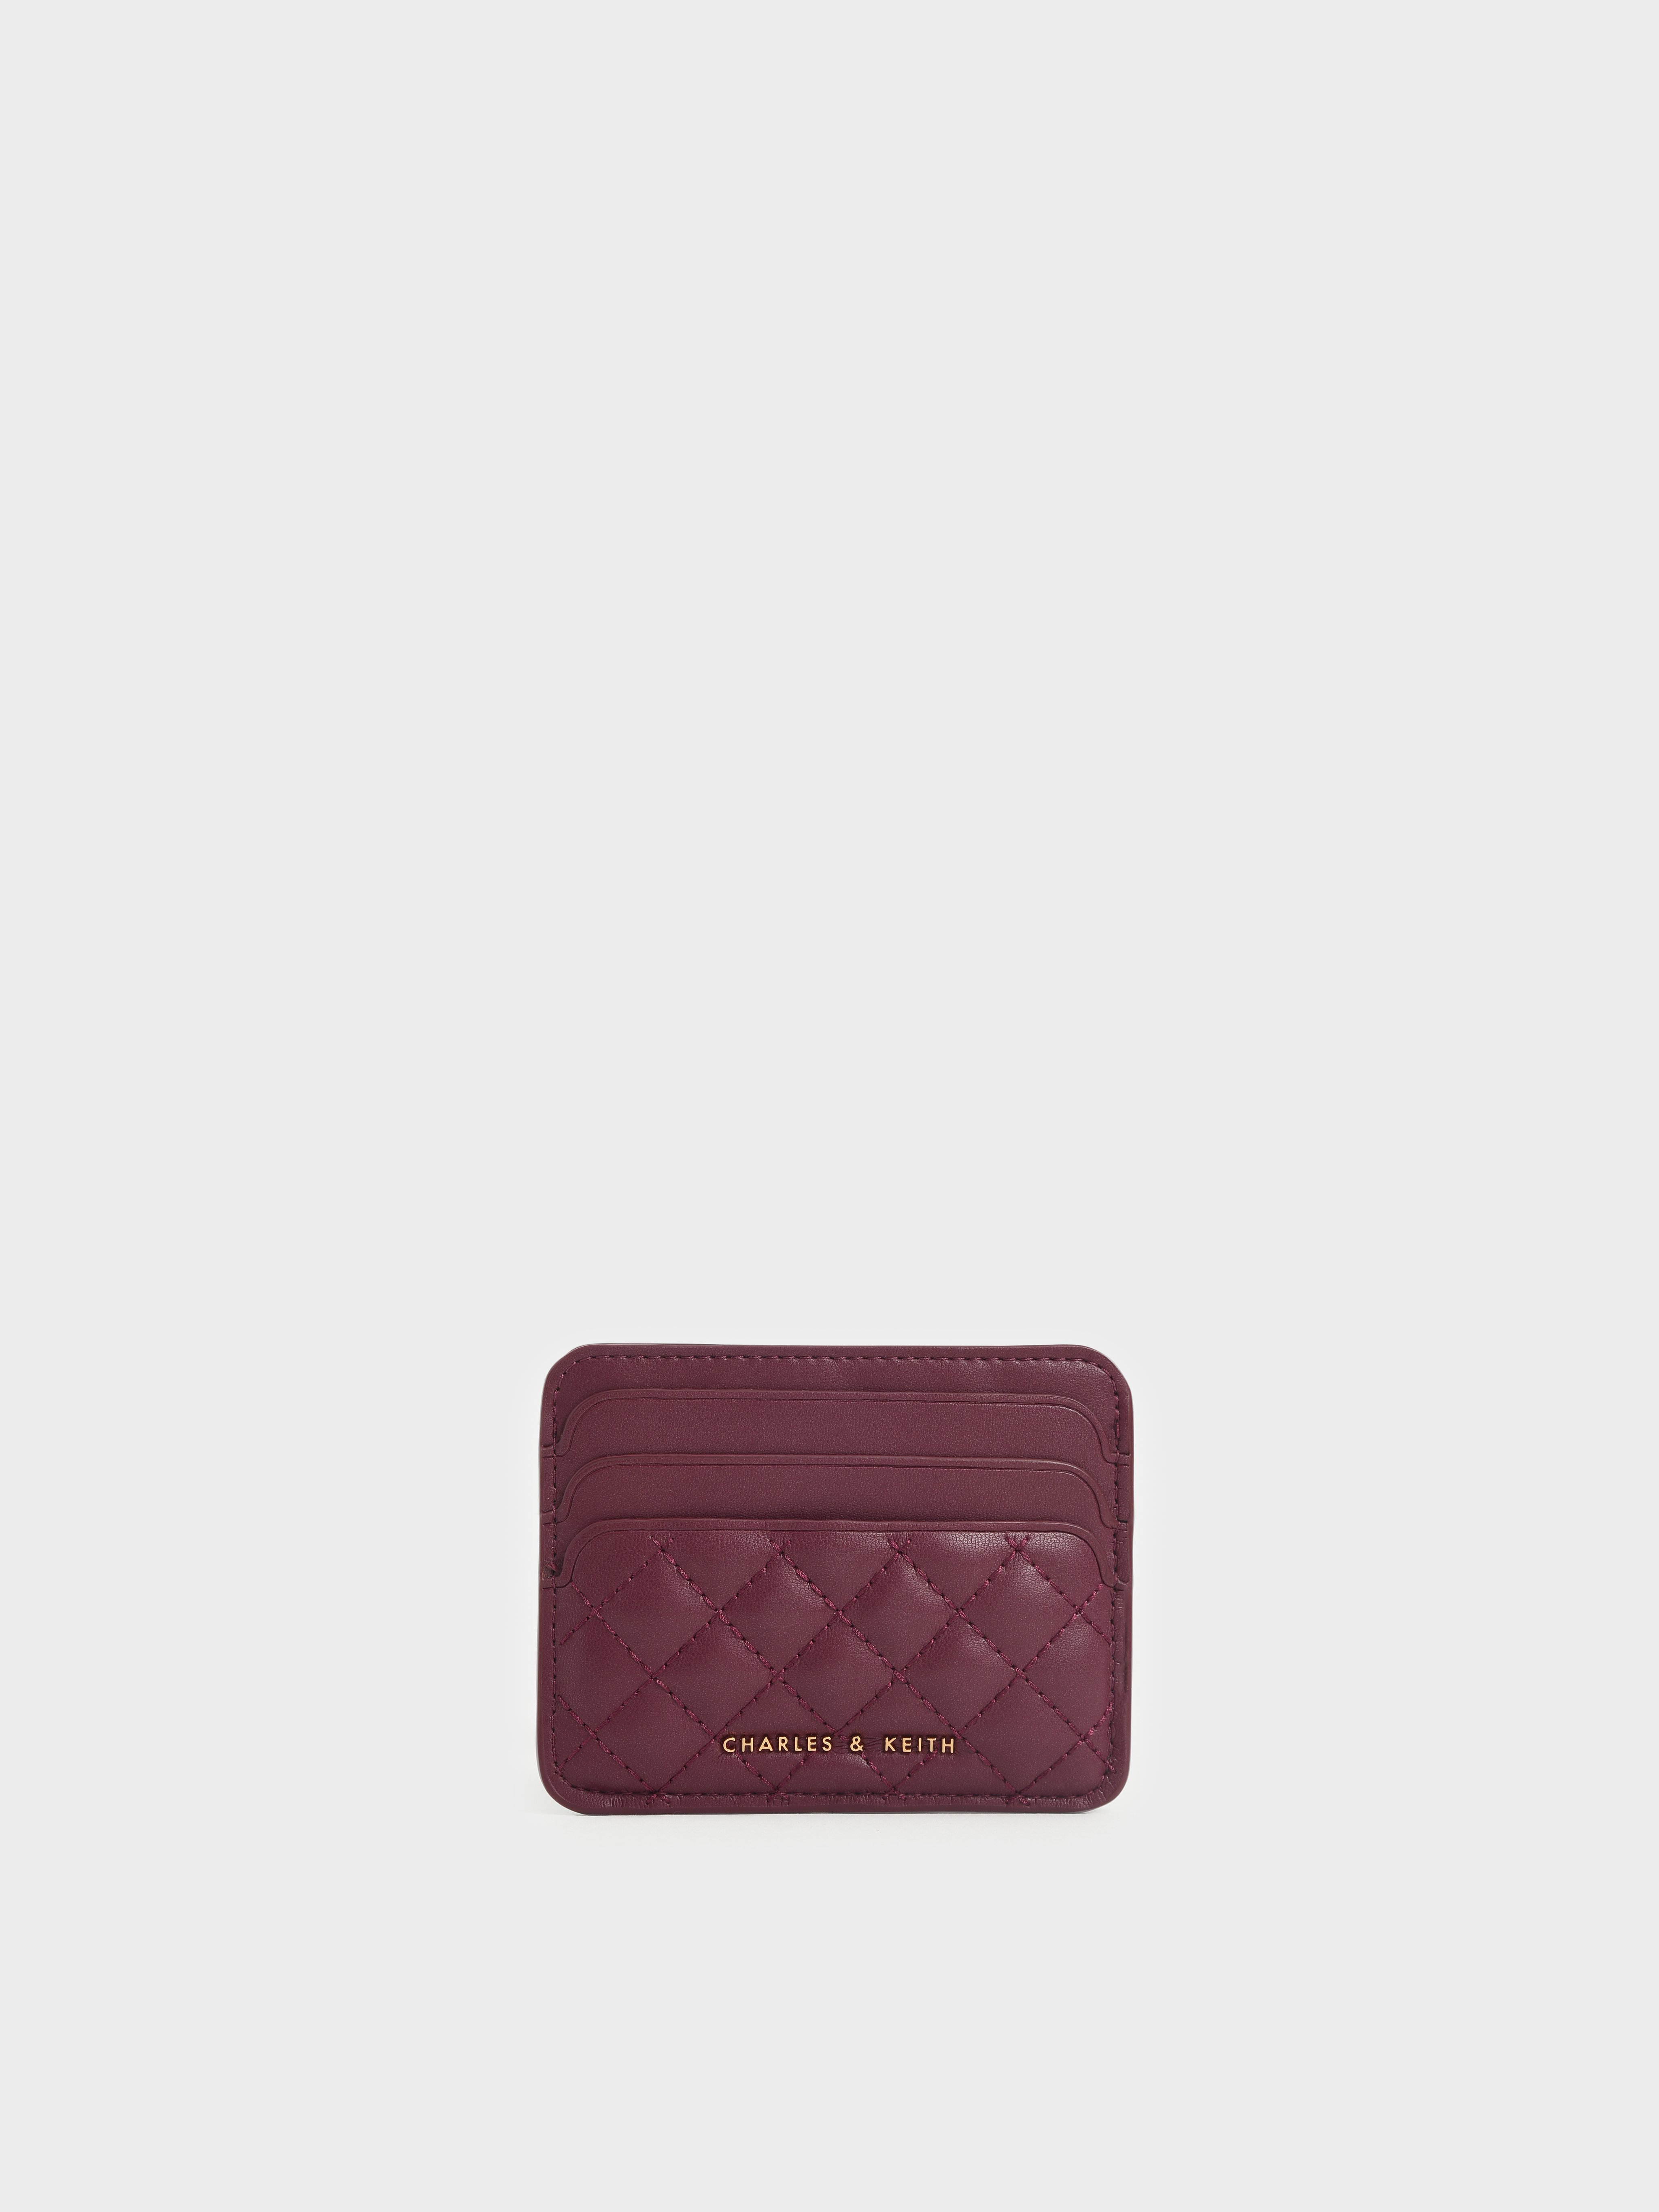 Charles & Keith - Women's Cleo Quilted Card Holder, Burgundy, Xxs